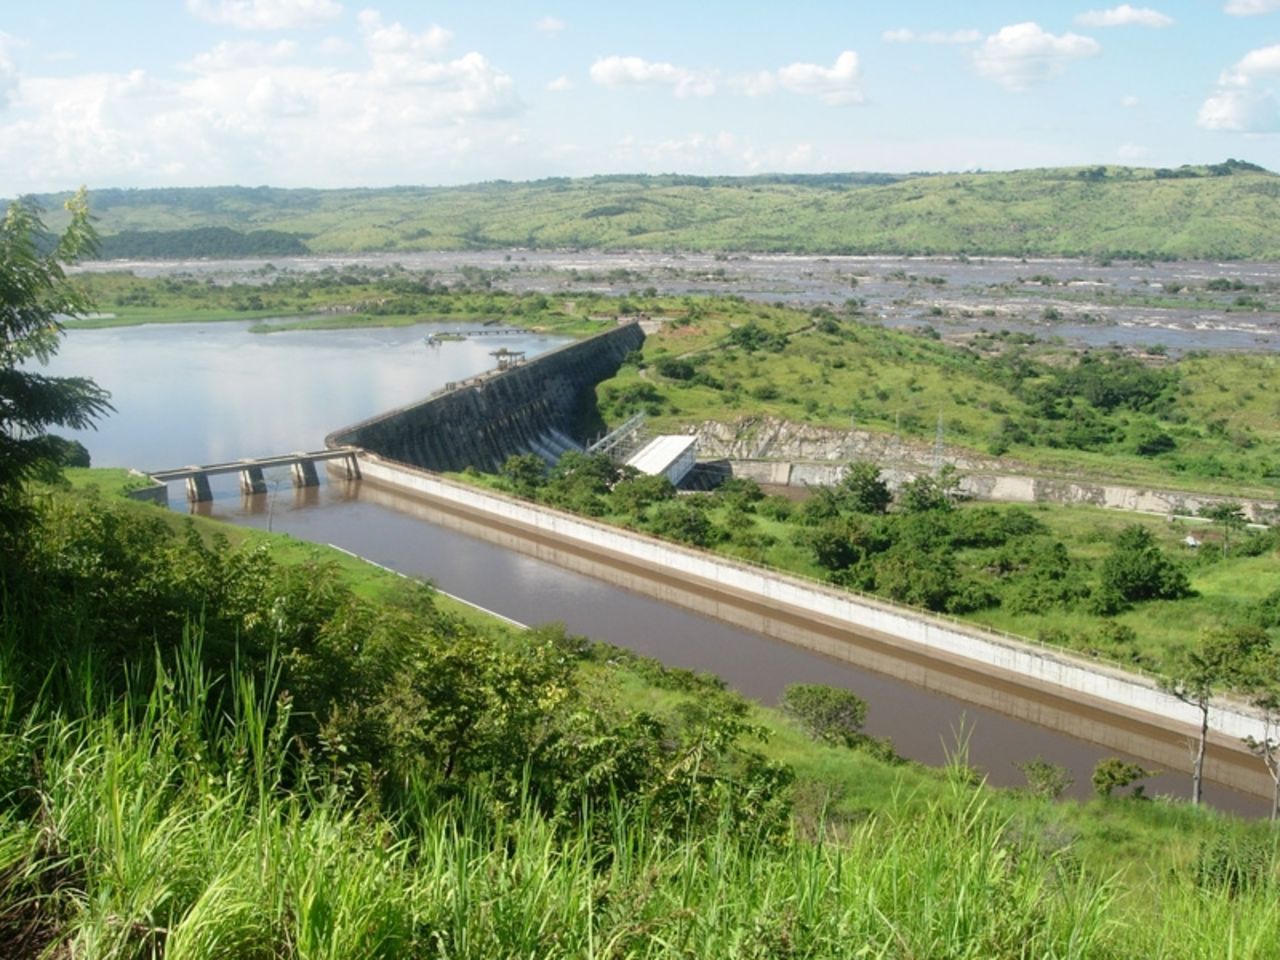 The Grand Inga dam is a planned hydroelectric dam on the Congo River at Inga Falls. The project is expected to cost more than $80 billion in total.